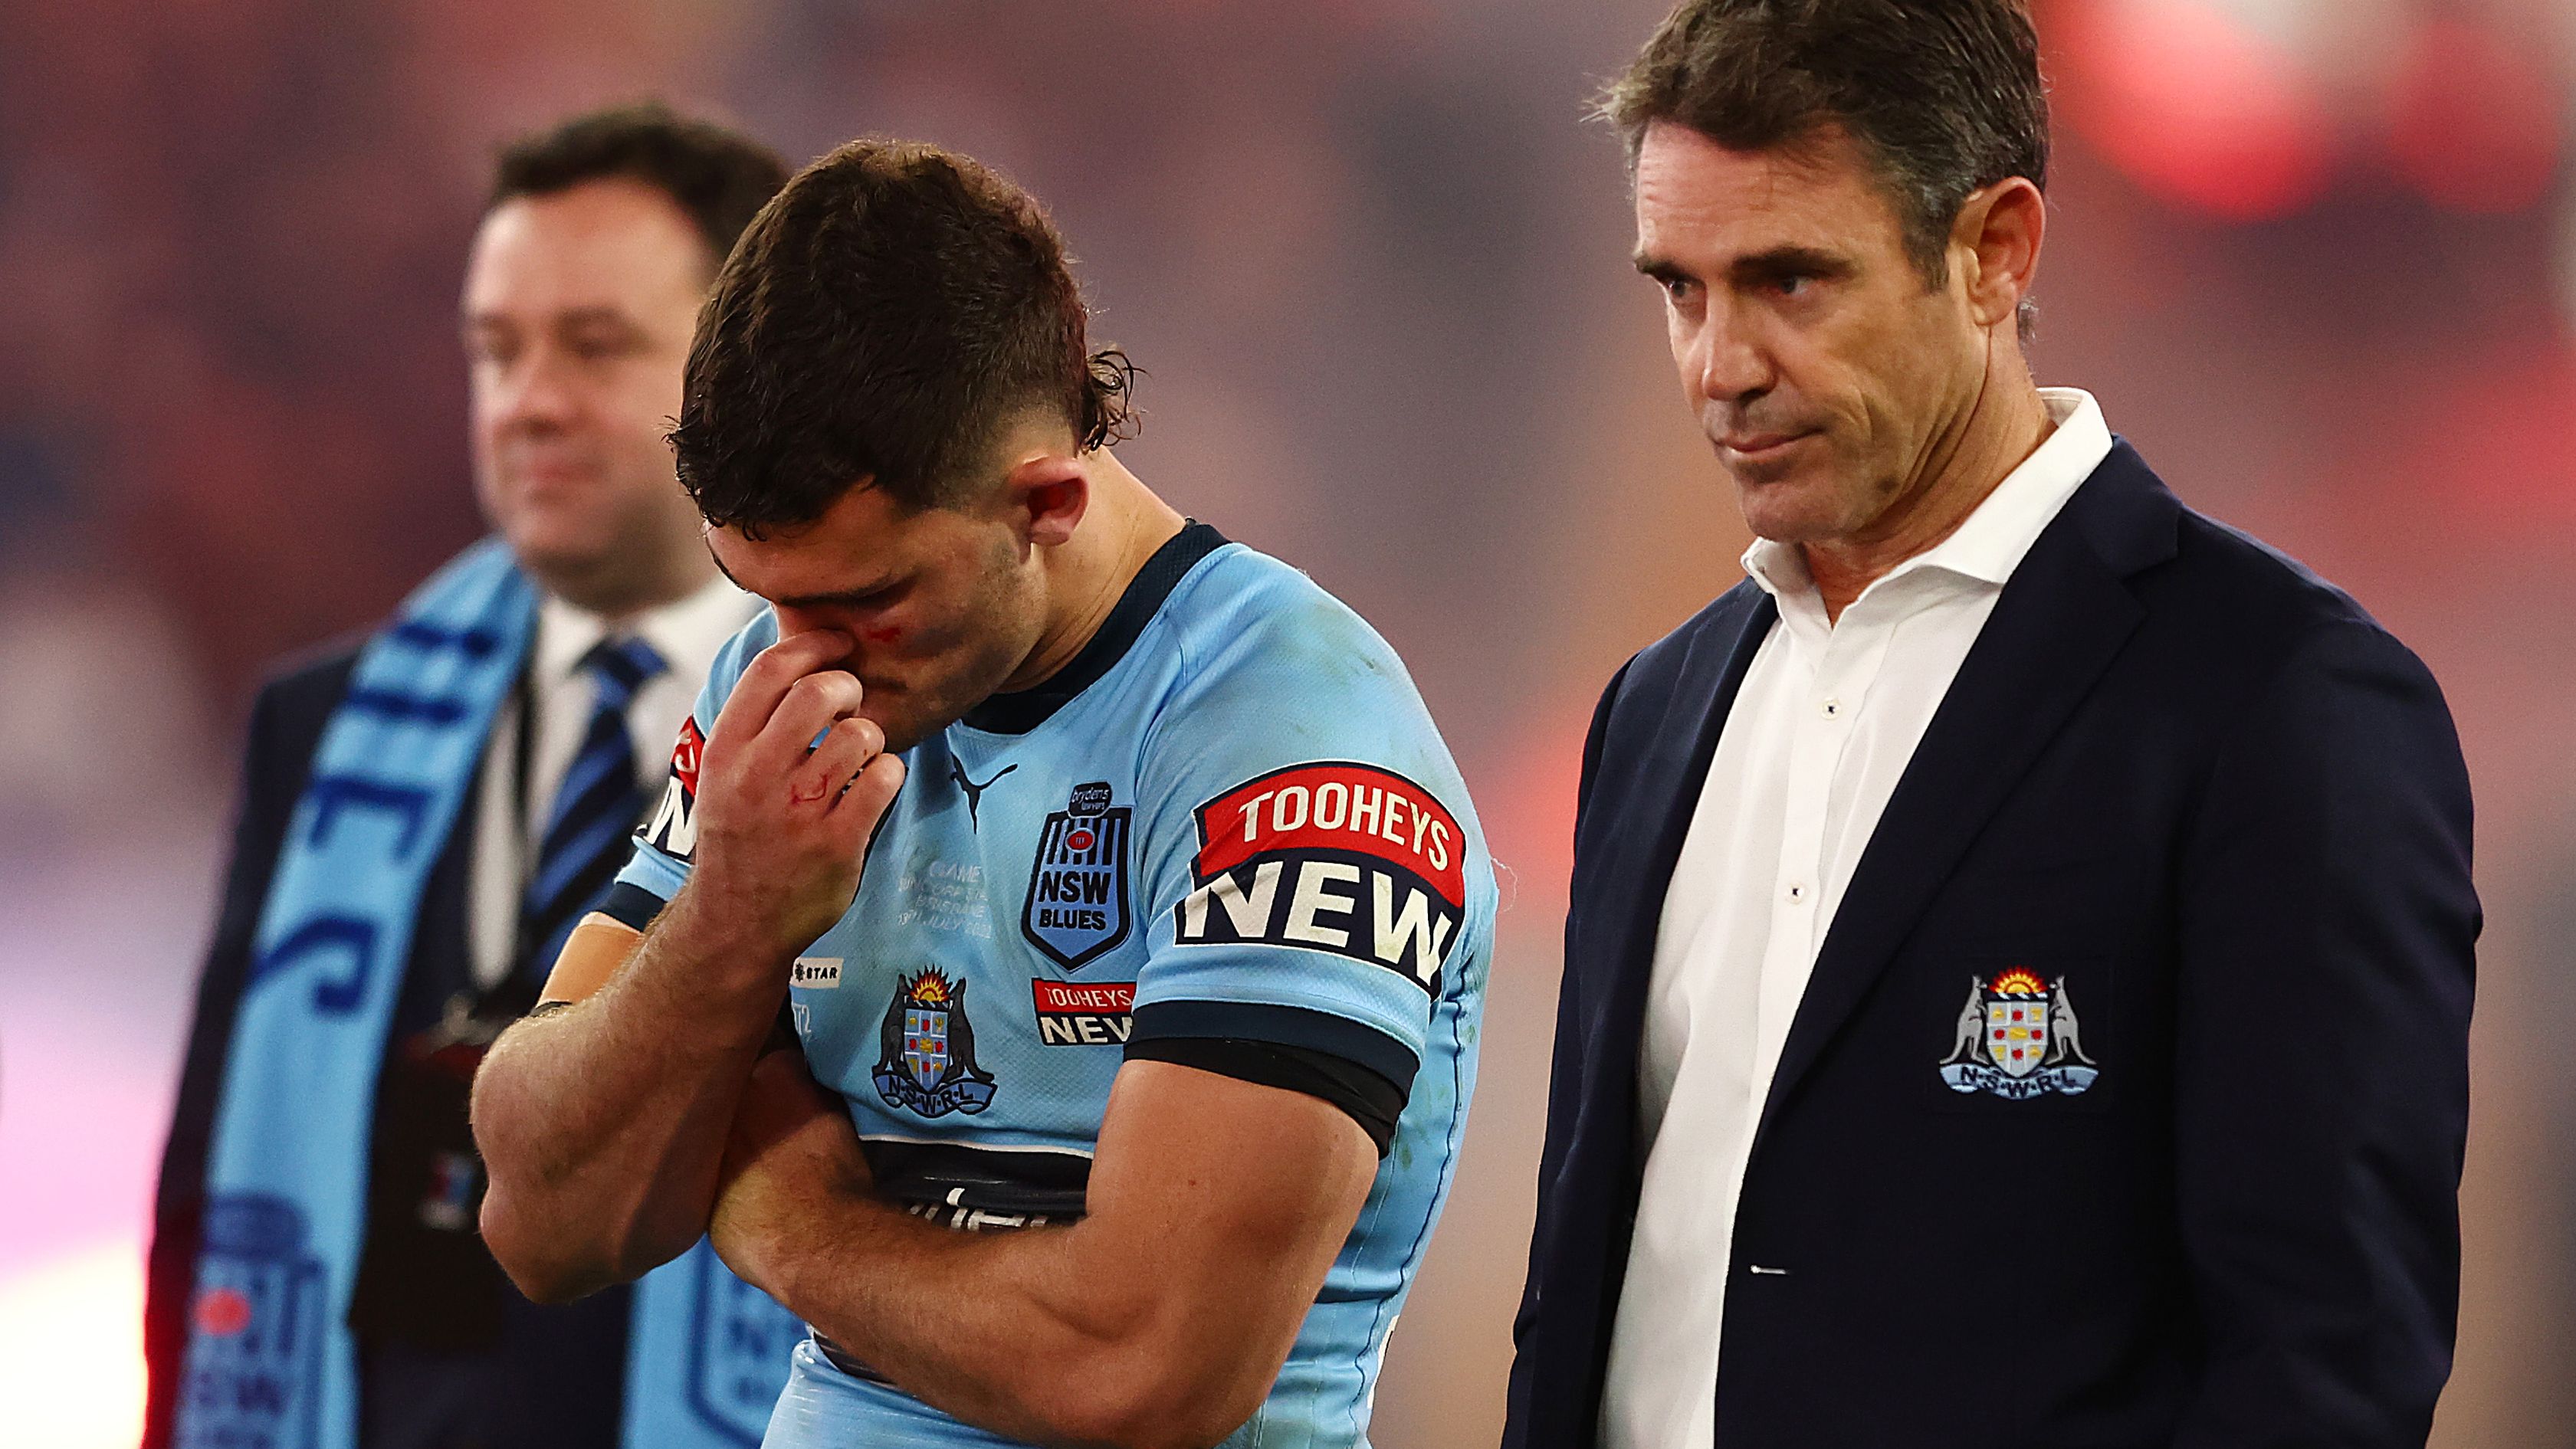 'Sore losers' a stain on epic State of Origin finale, writes Mark Levy